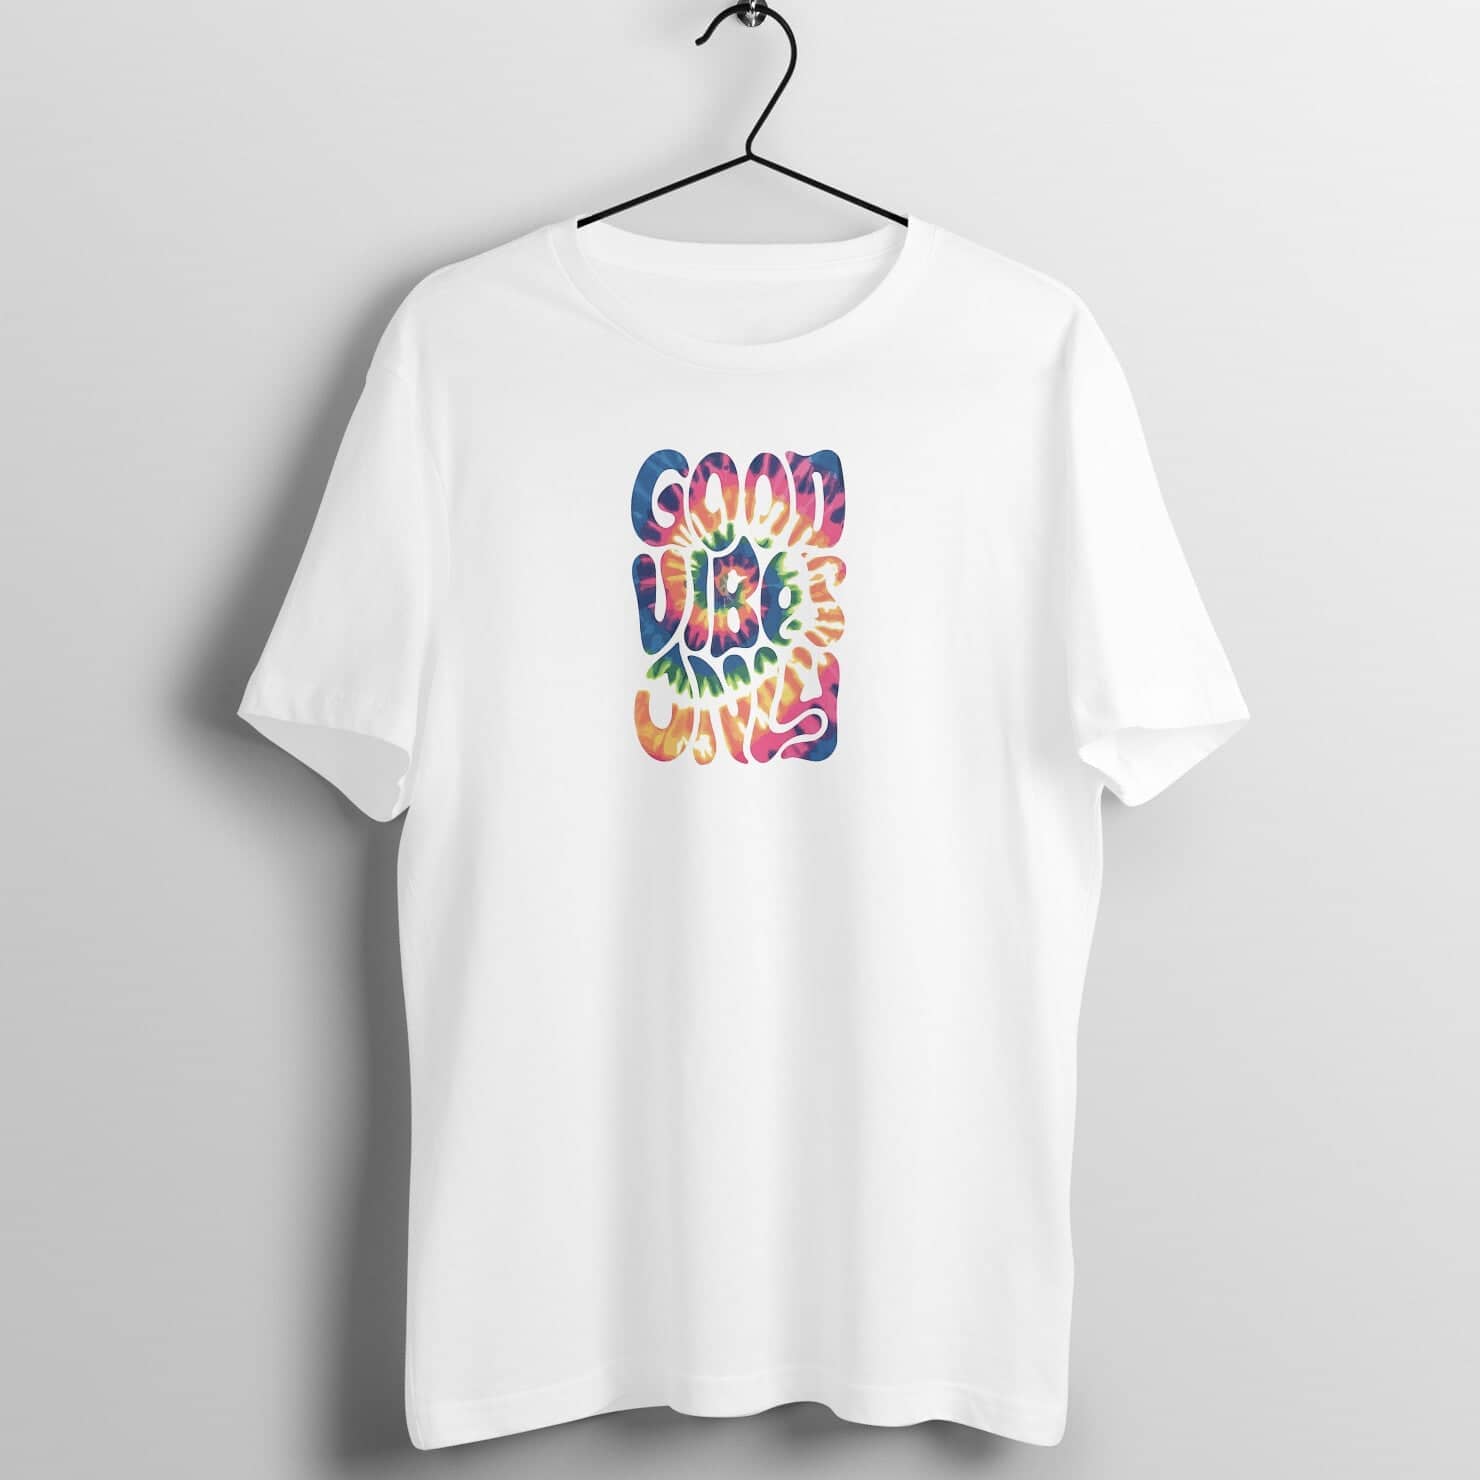 Good Vibes Only Exclusive Multi Colour T Shirt for Men and Women freeshipping - Catch My Drift India